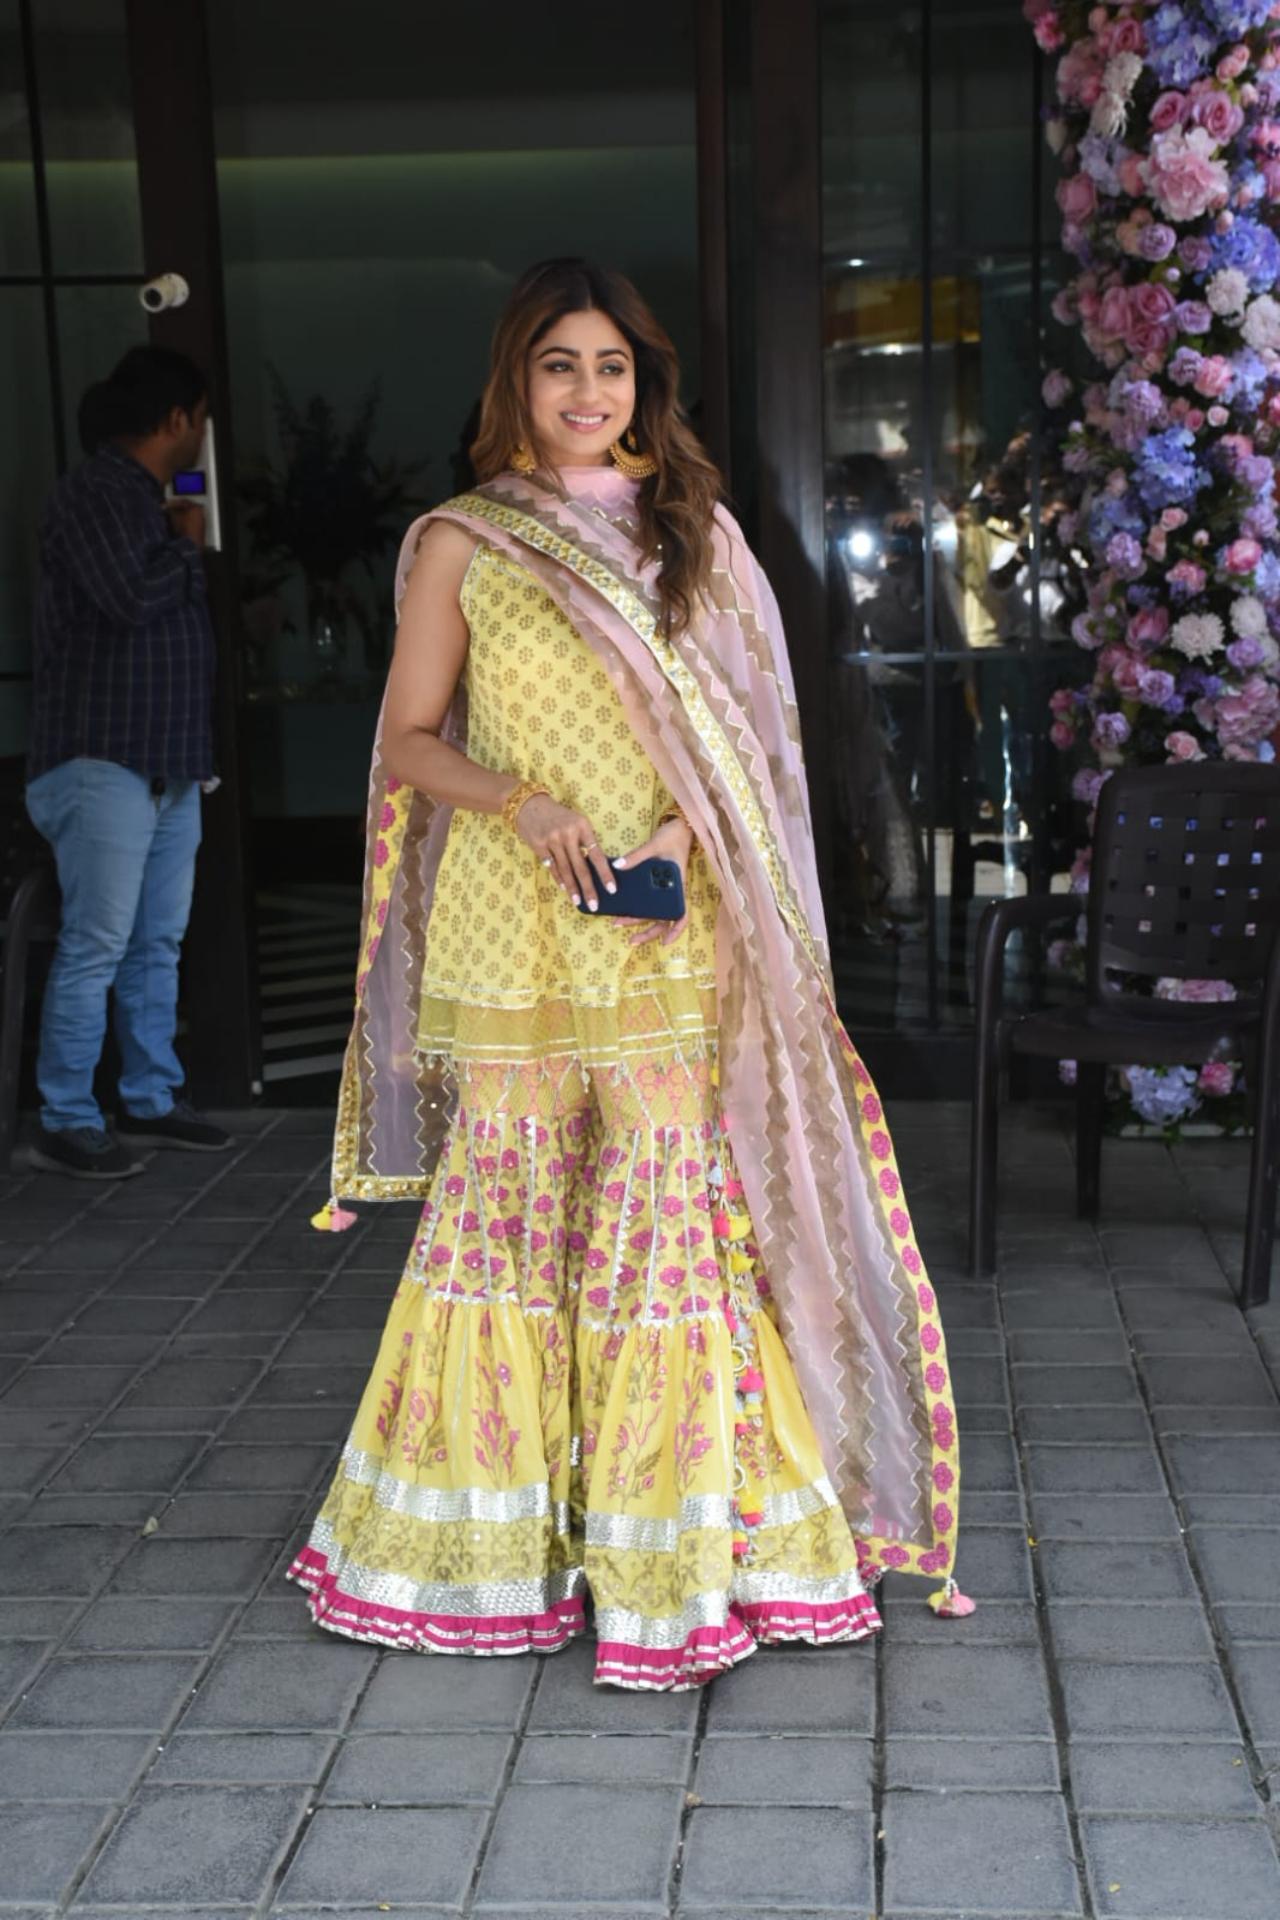 Shamita Shetty looked gorgeous in a yellow traditional attire and was all smiles as she posed for the paparazzi before entering Arpita and Aayush Sharma's residence